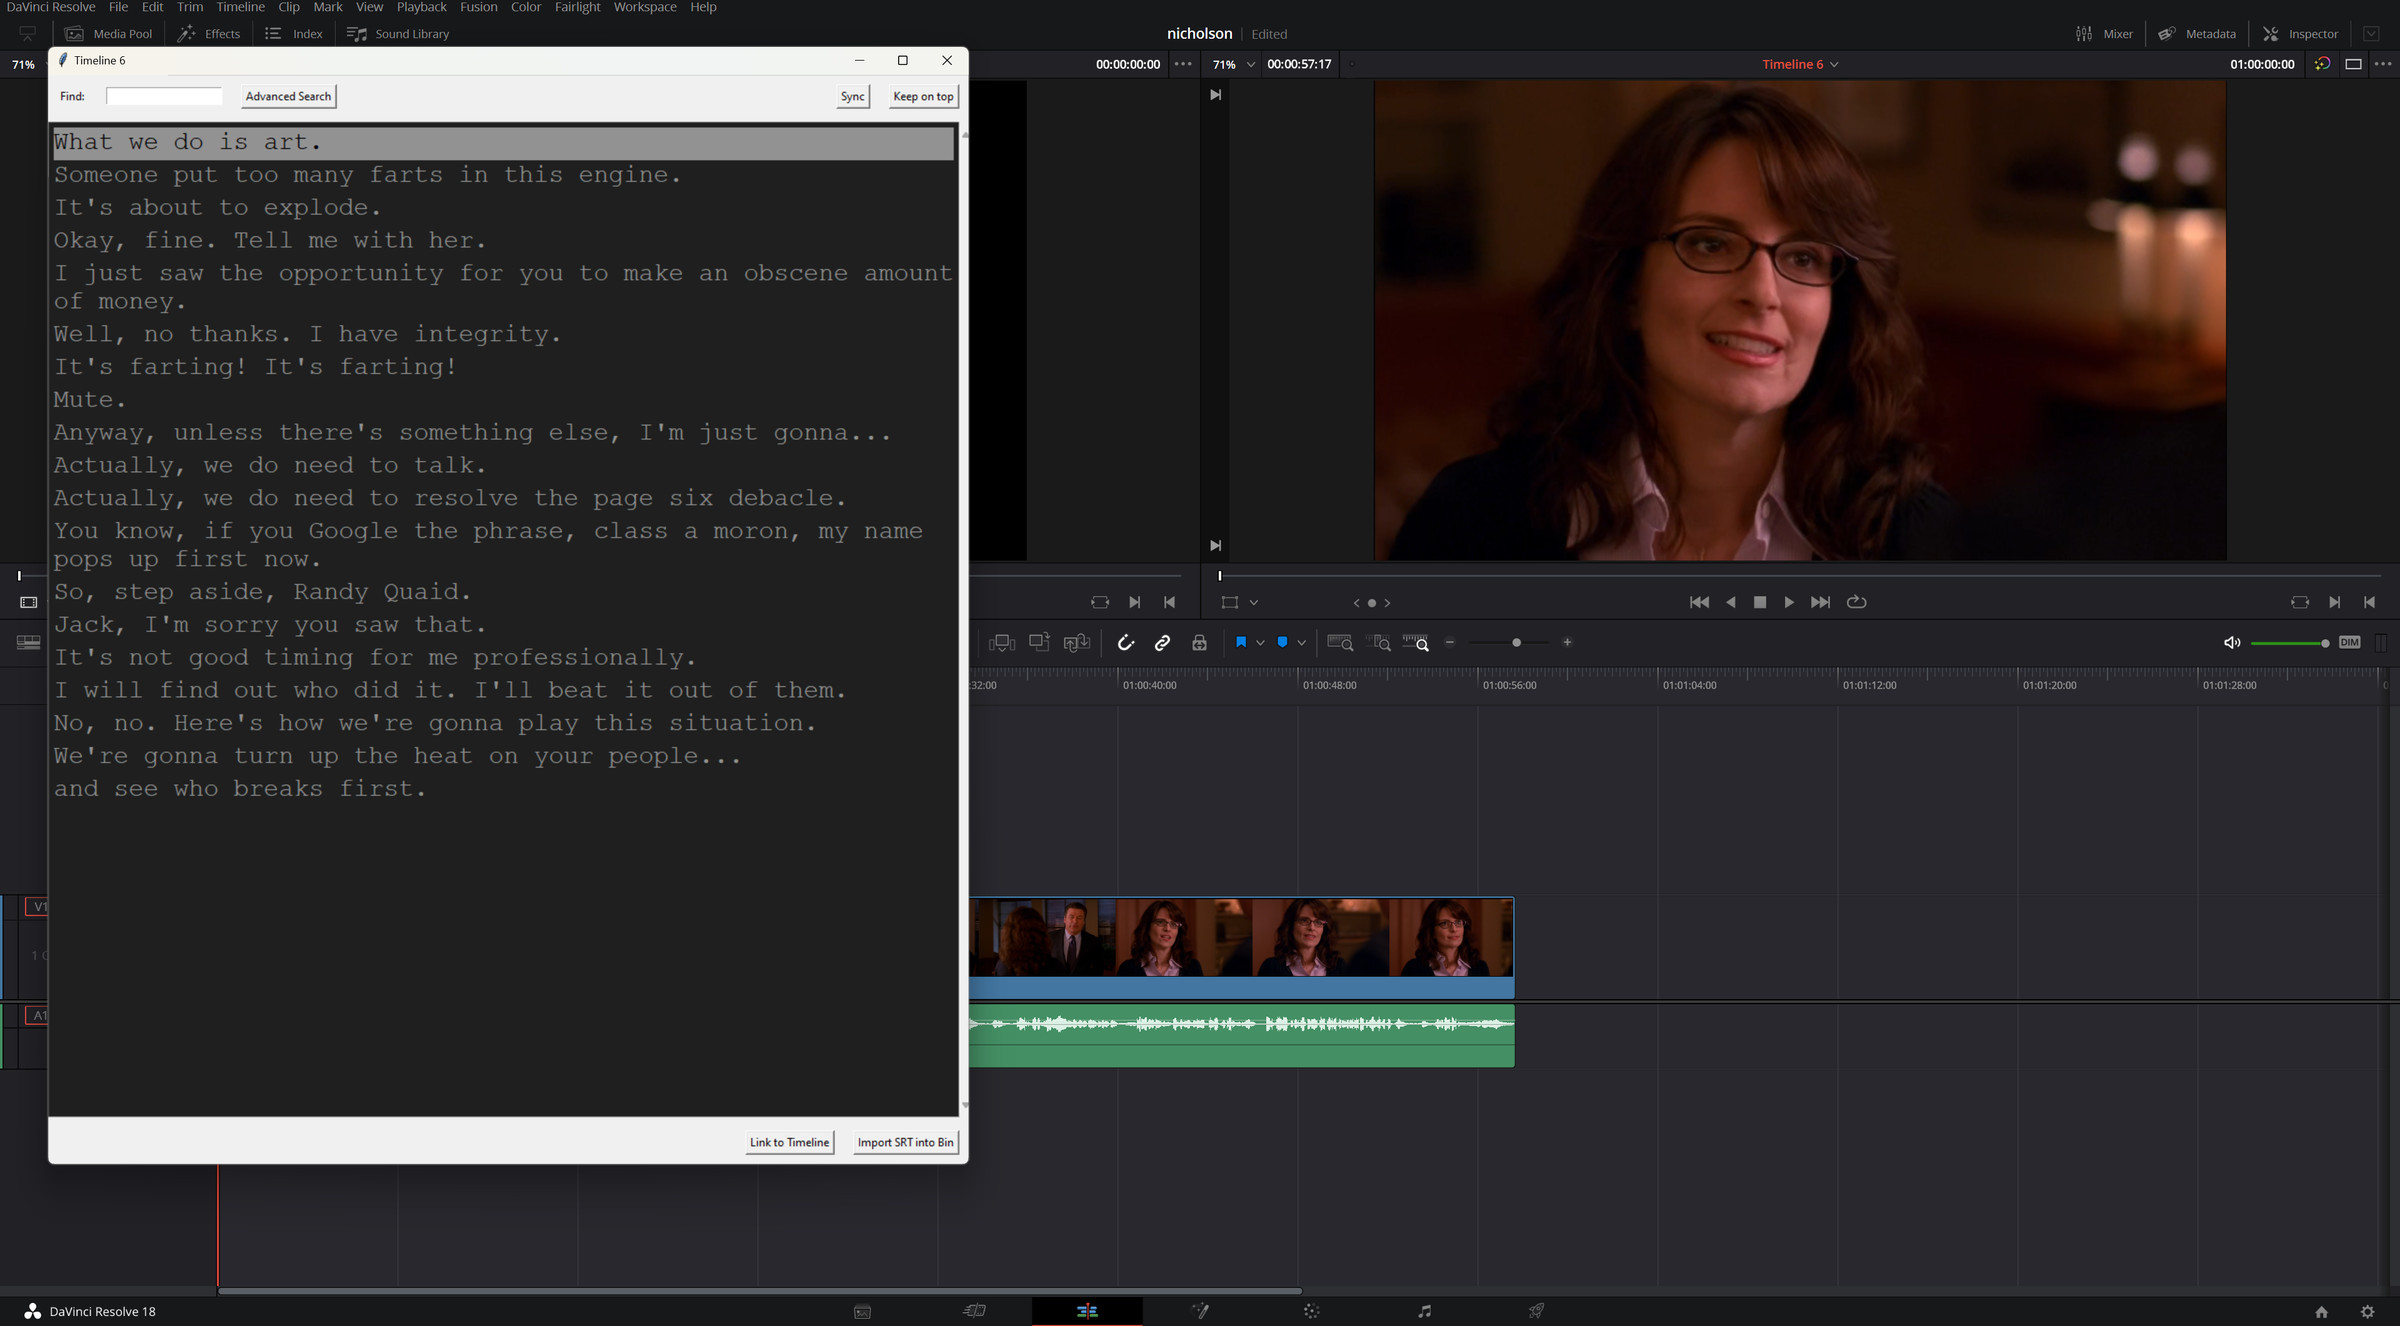 An image of StoryToolkitAI subtitling a portion of the “MILF Island” episode of 30 Rock in Resolve.